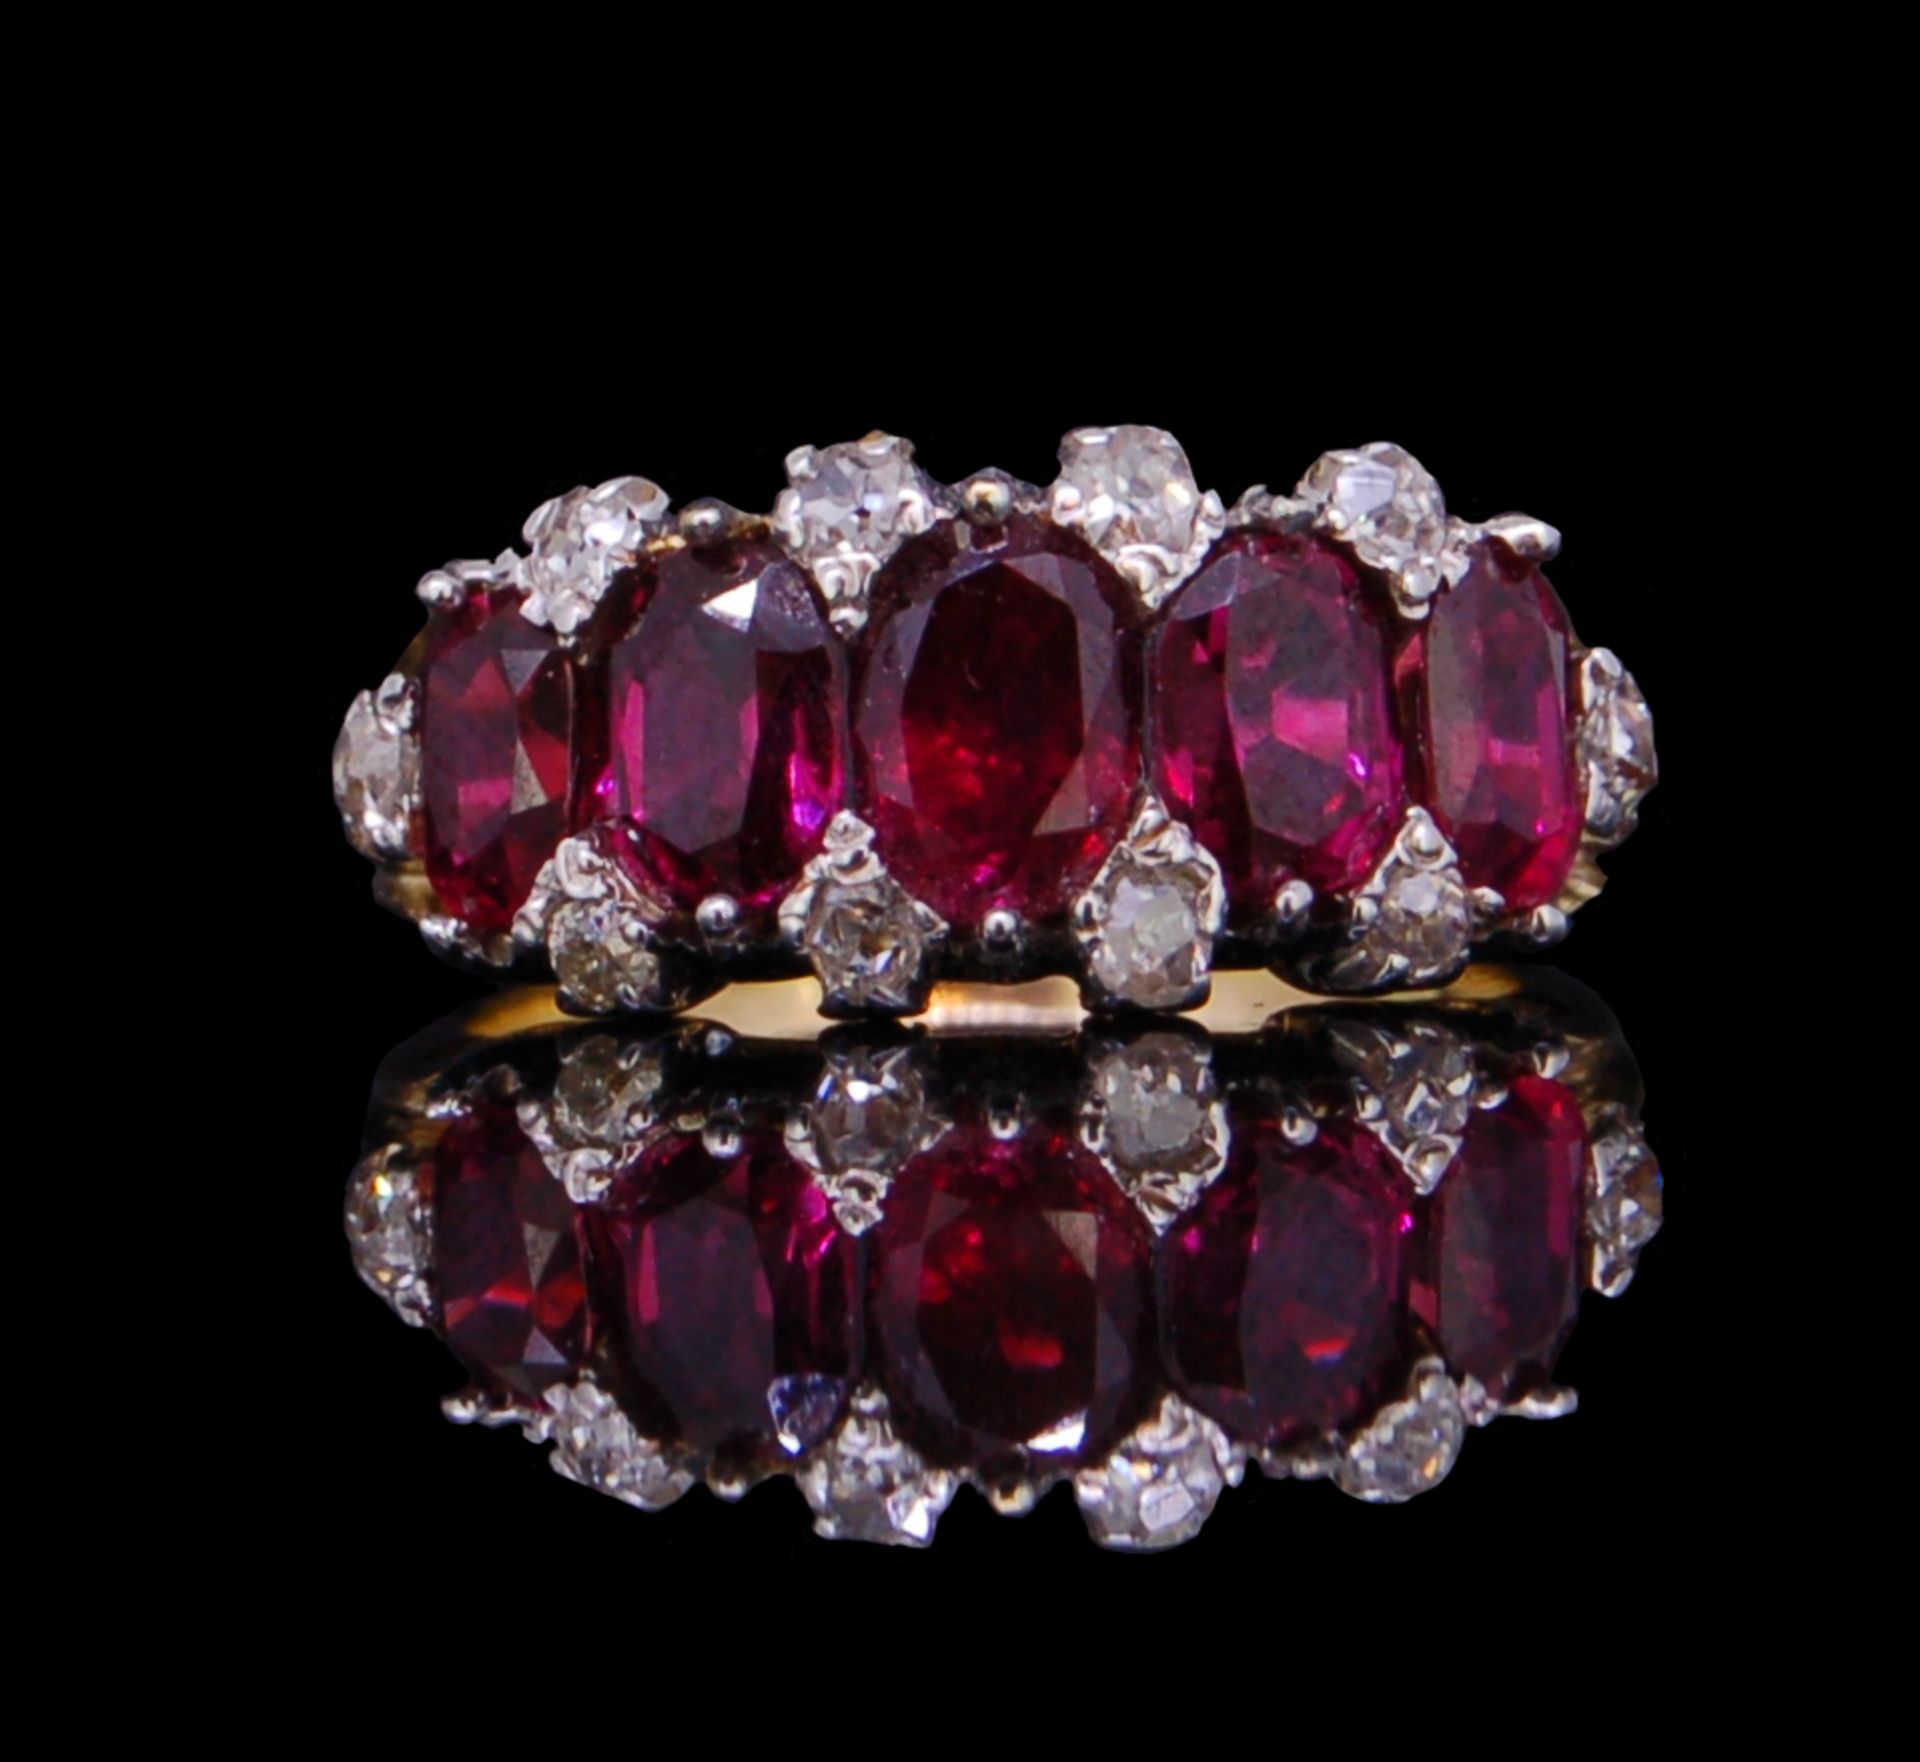 ANTIQUE FIVE STONE RUBY RING WITH DIAMOND POINTS